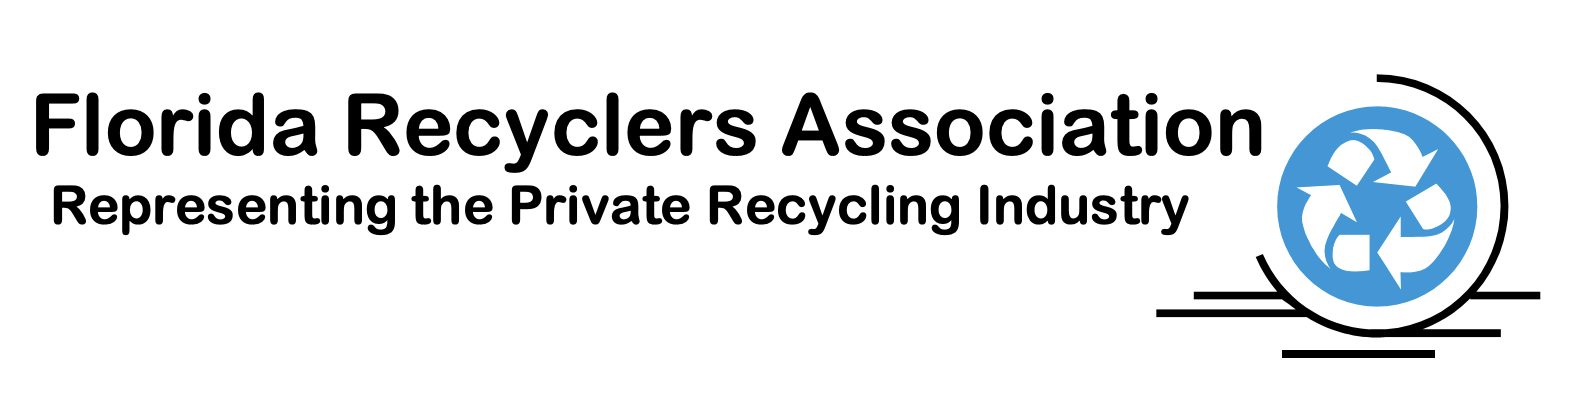 fl-recyclers